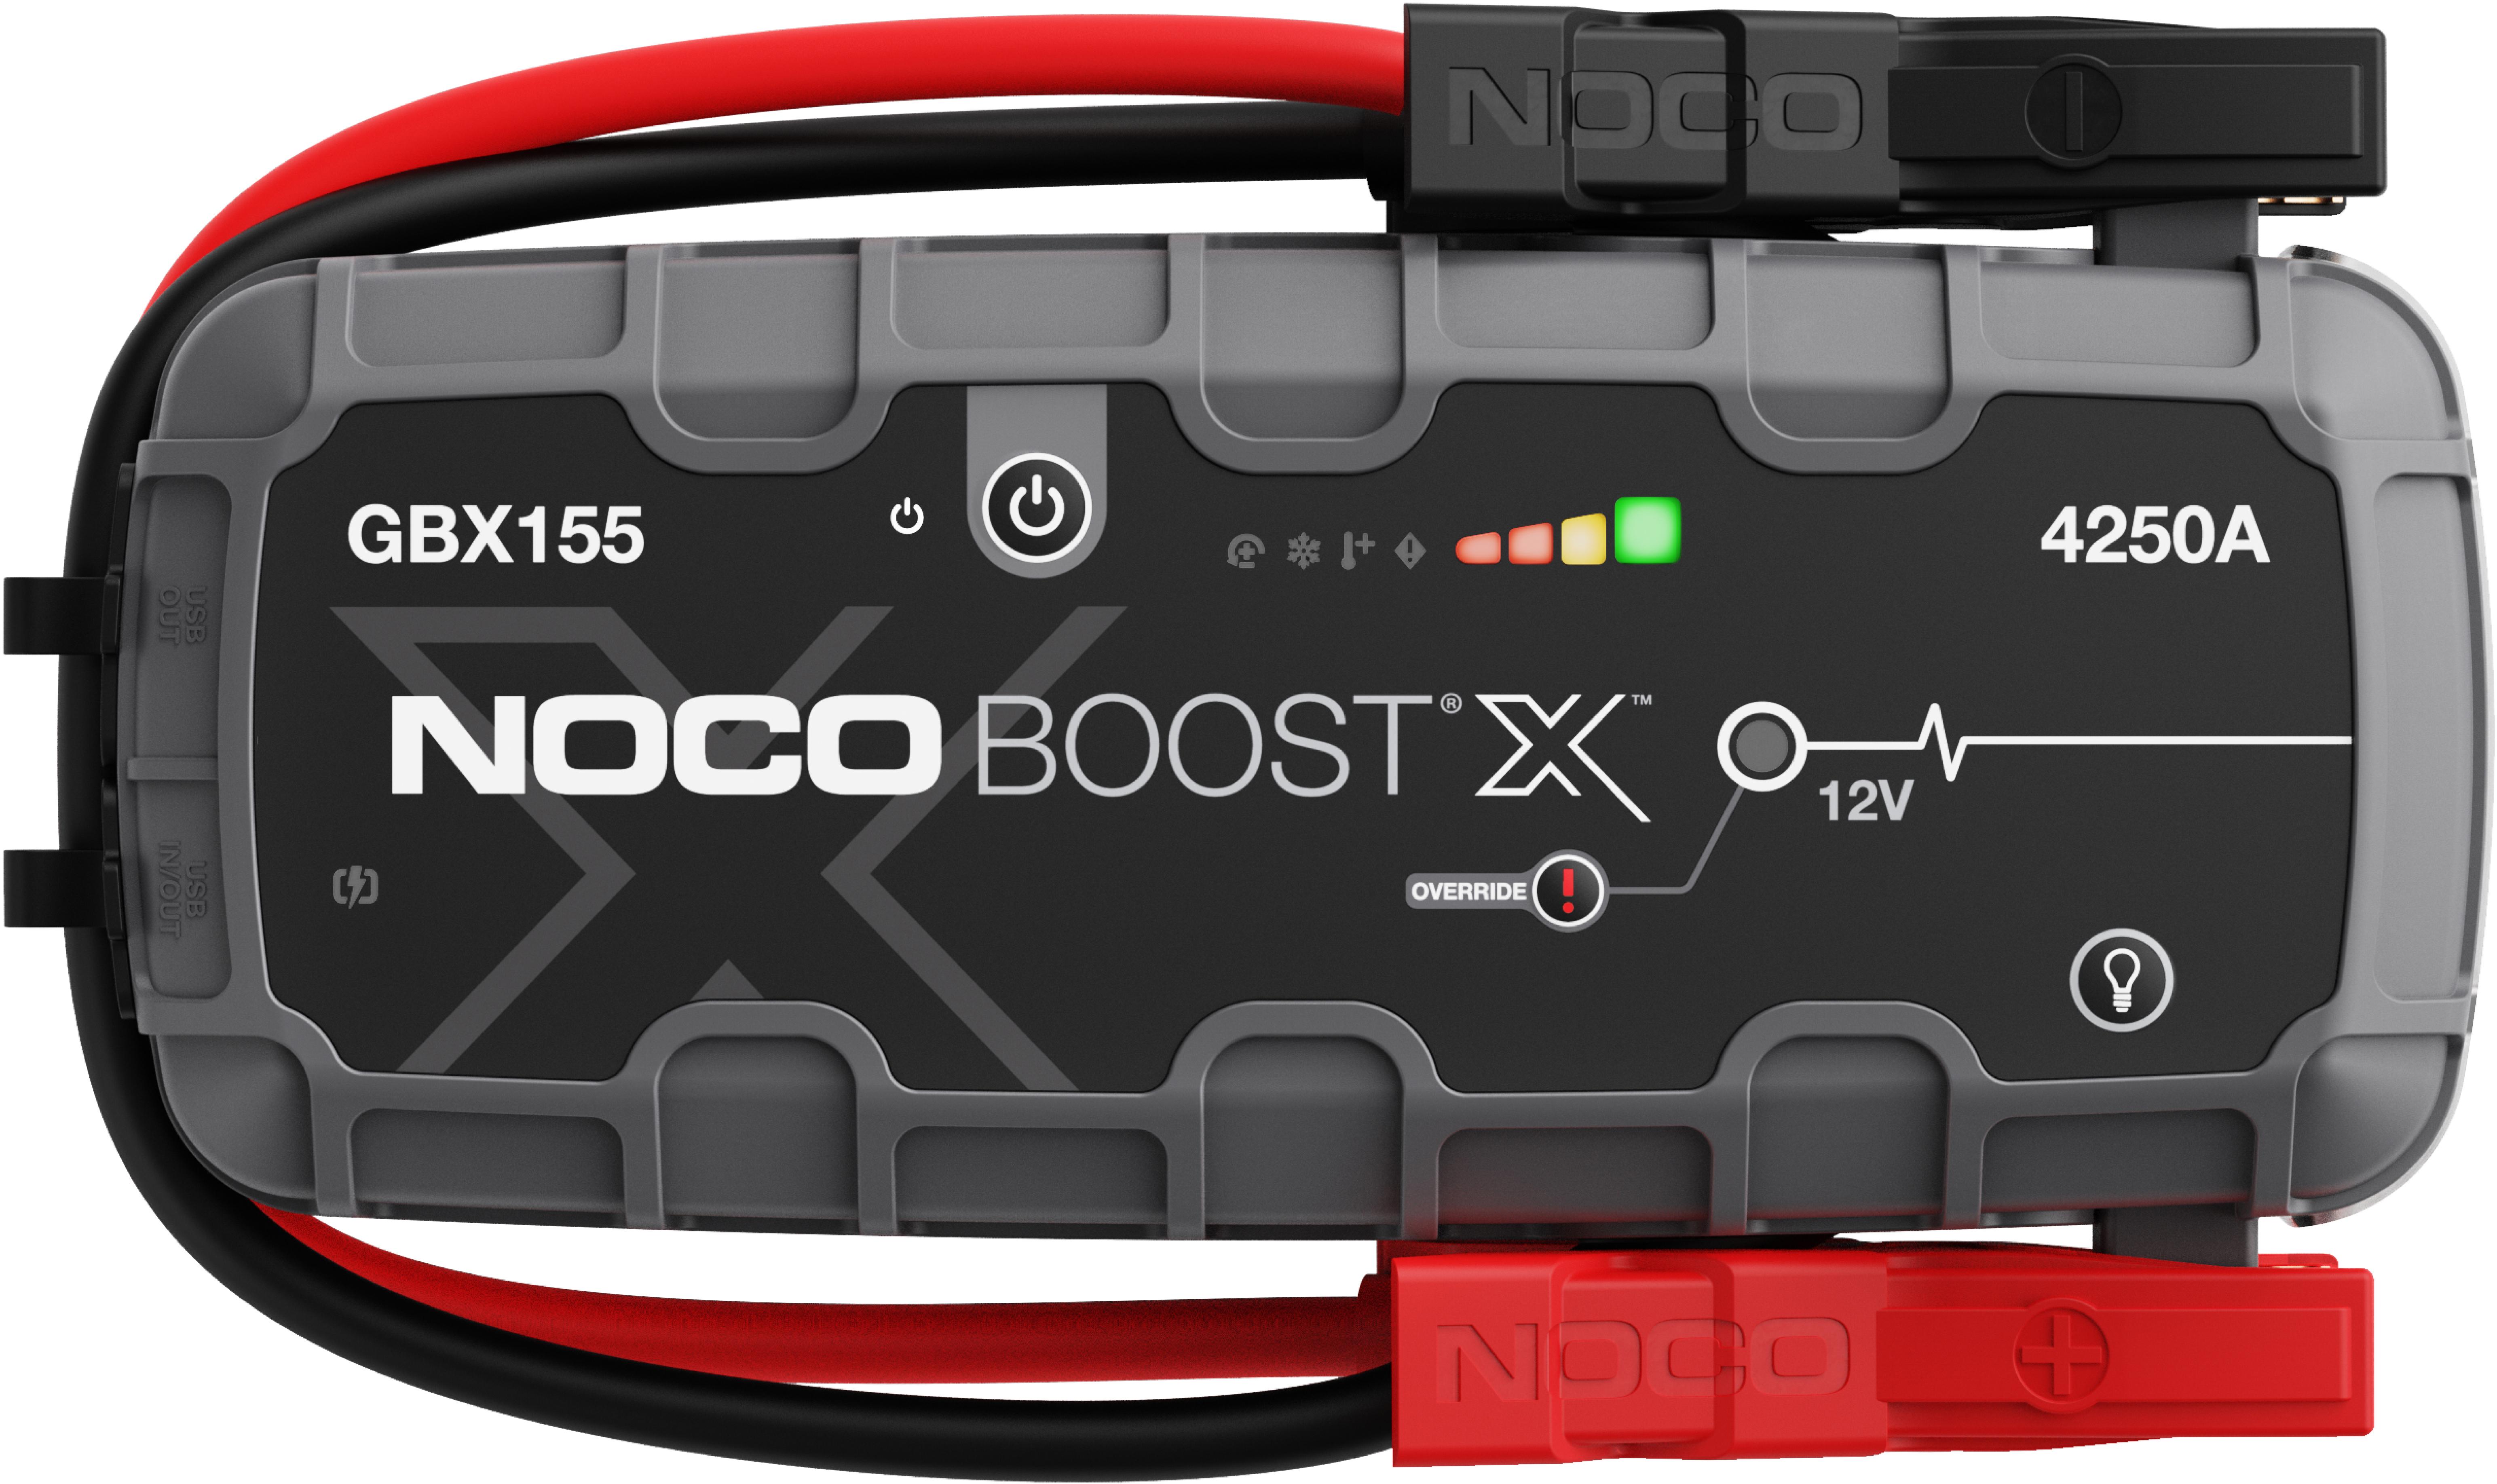 Noco Boost X Gbx155 4250A 12V Ultrasafe Portable Lithium Jump Starter